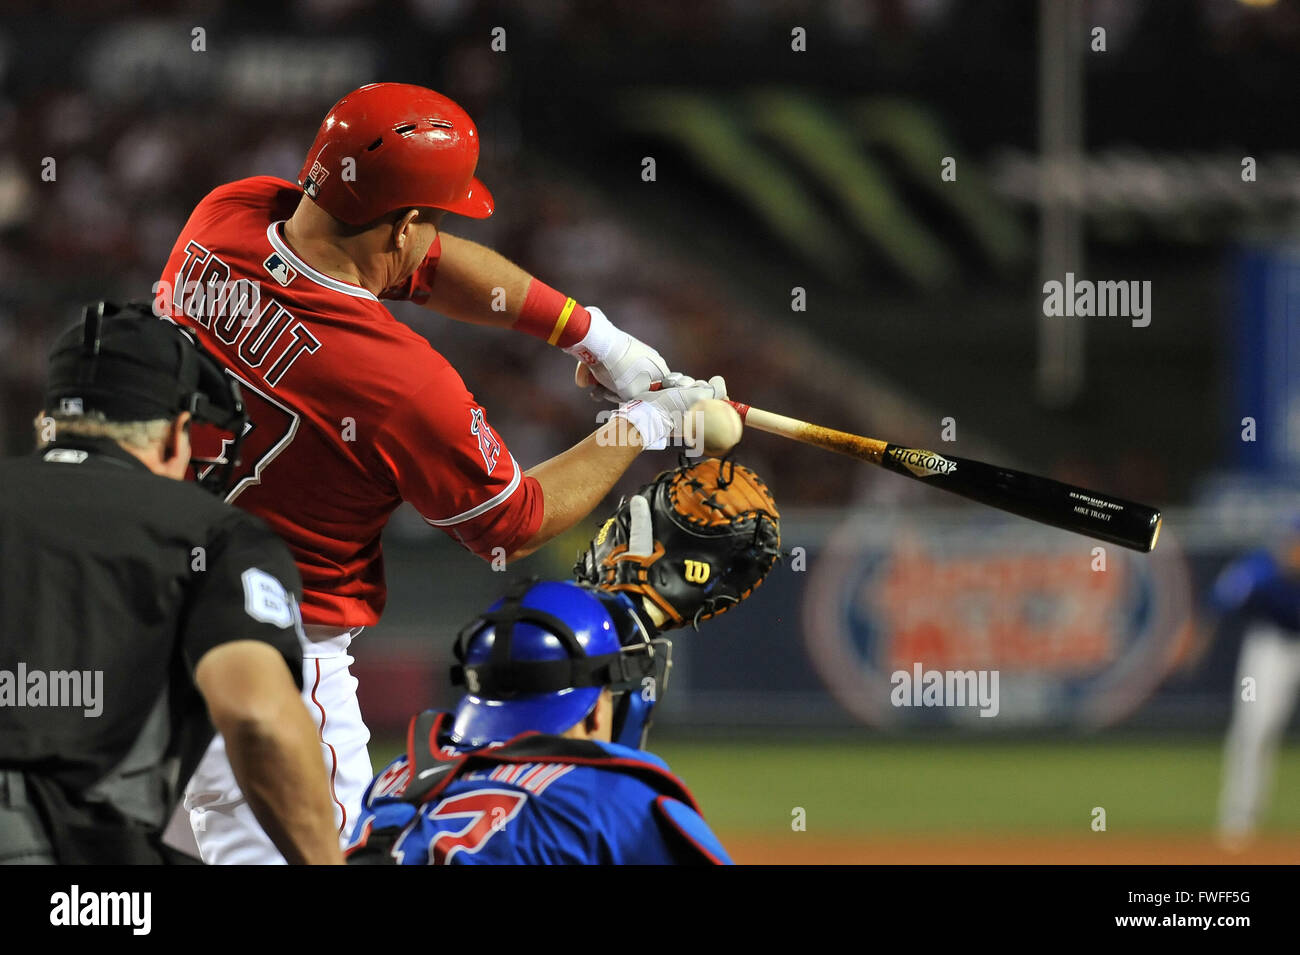 File:Los Angeles Angels center fielder Mike Trout (27) (5971901786